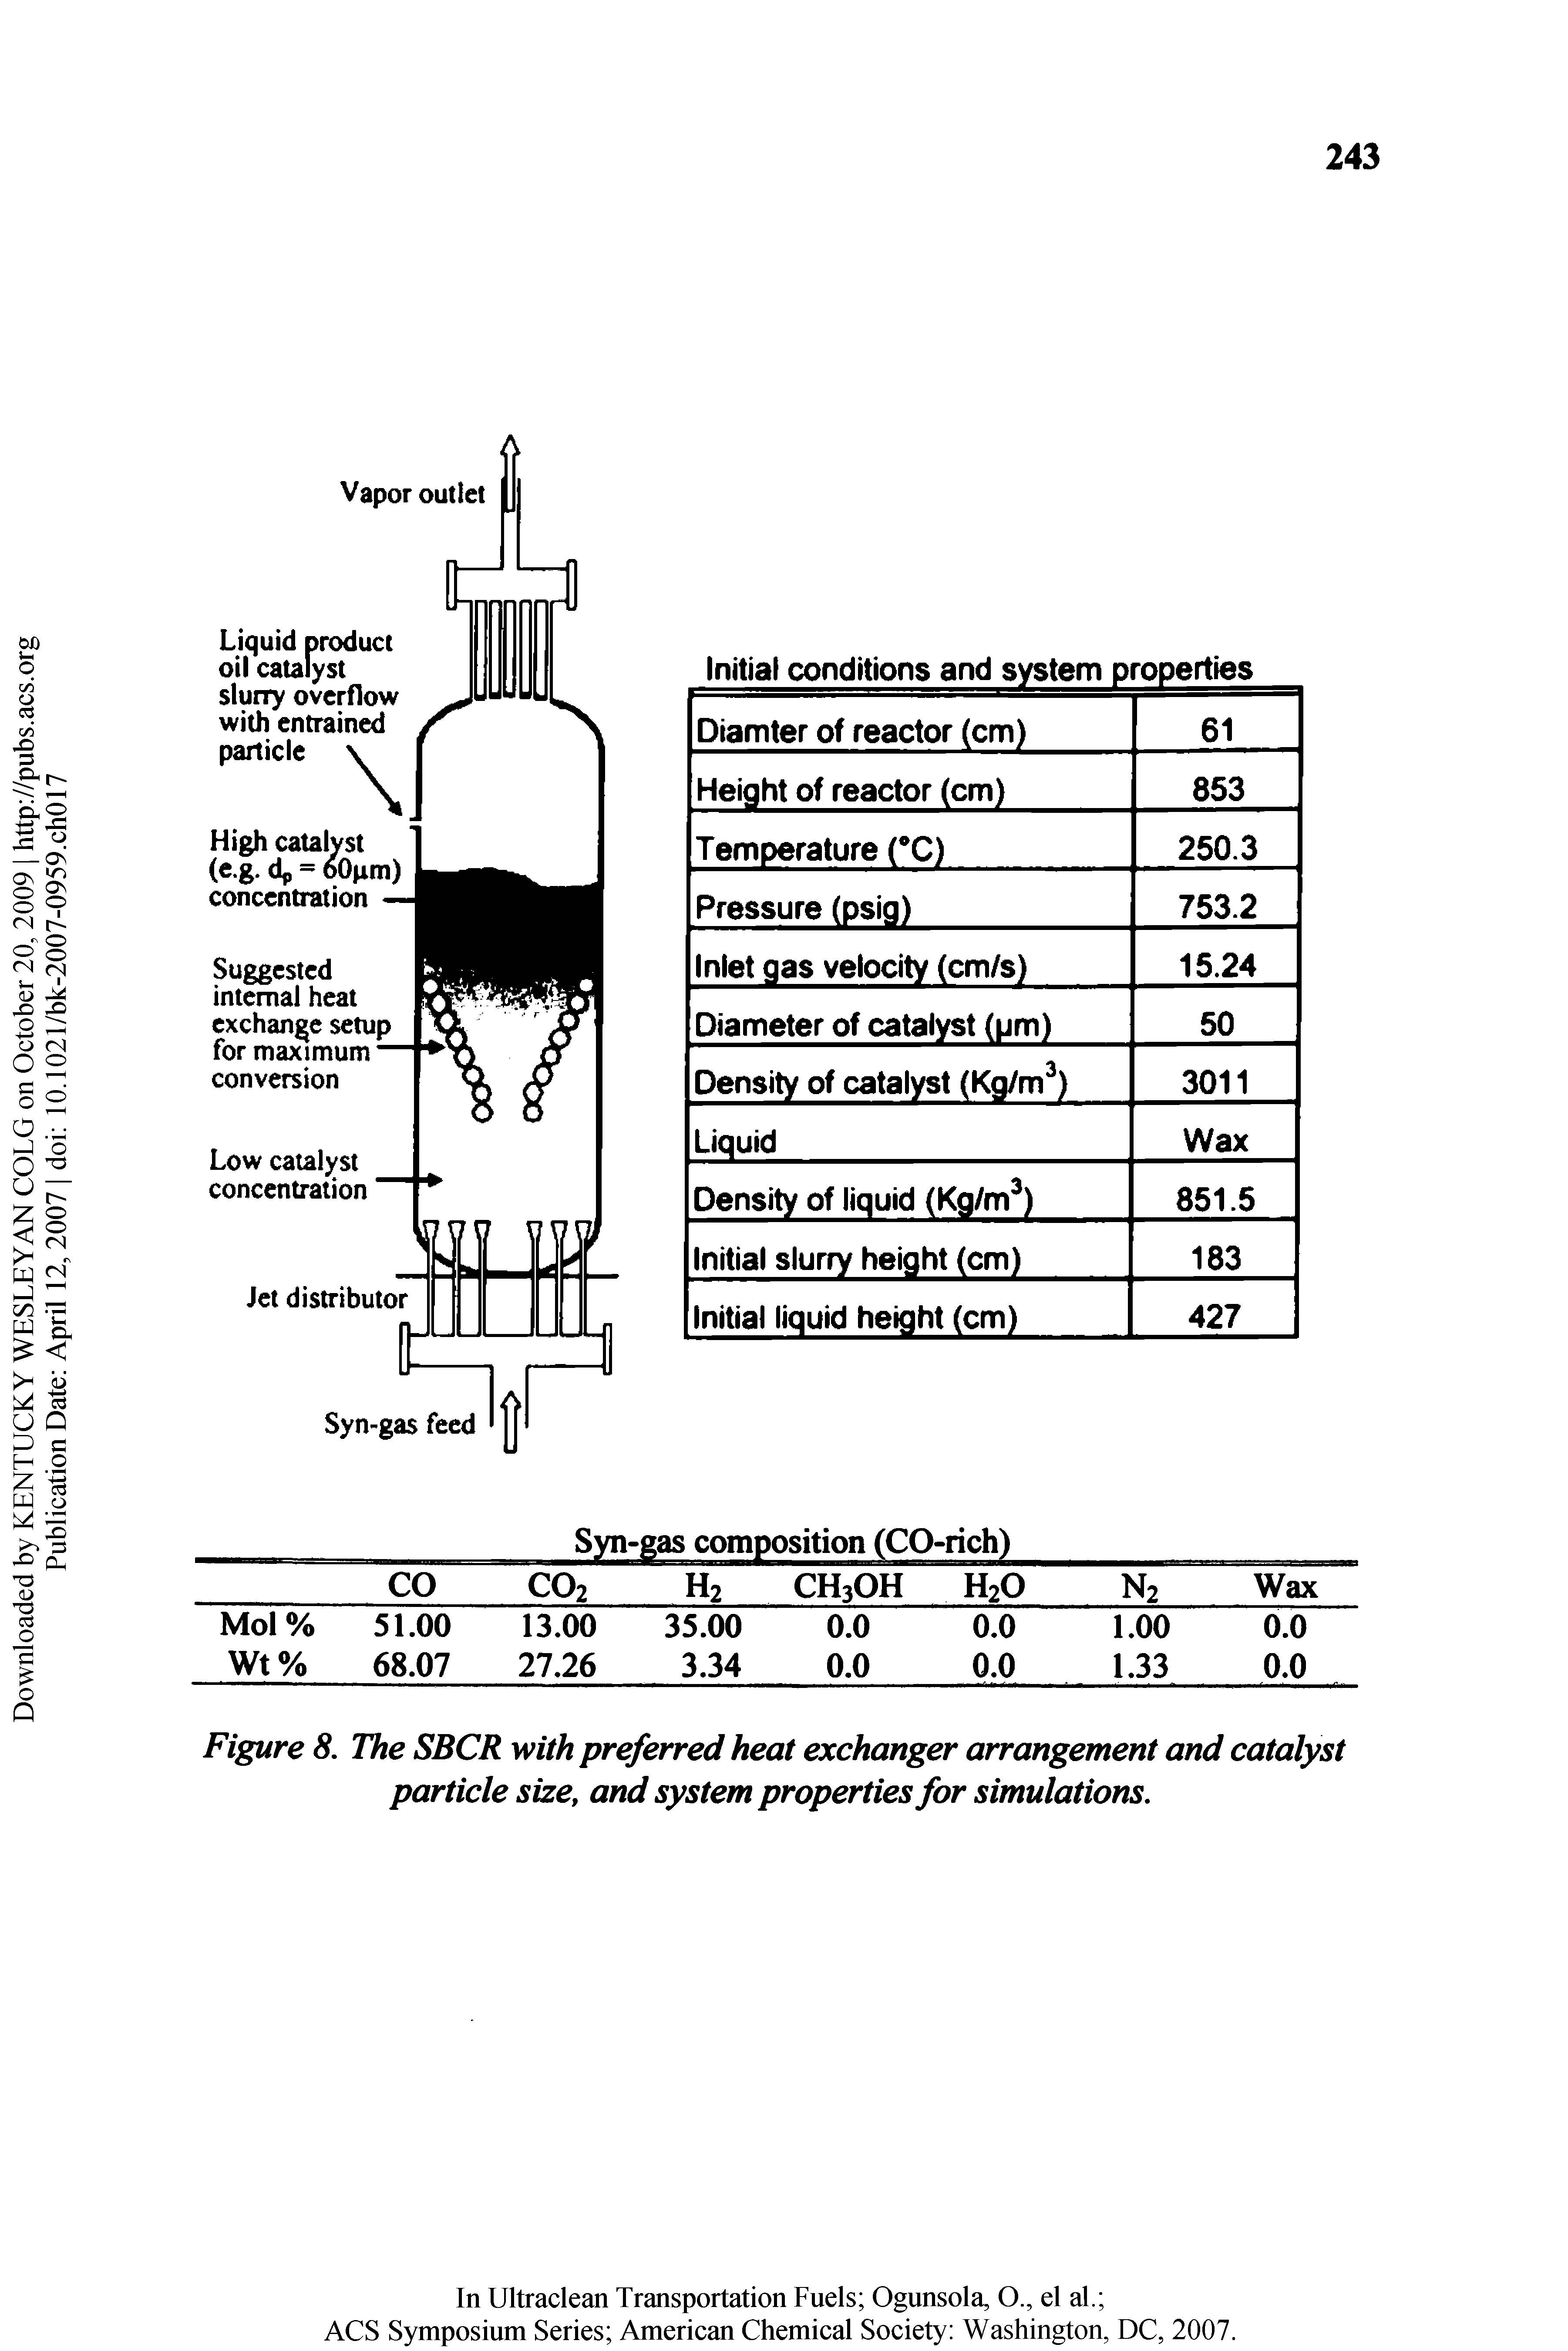 Figure 8, The SBCR with preferred heat exchanger arrangement and catalyst particle size, and system properties for simulations.